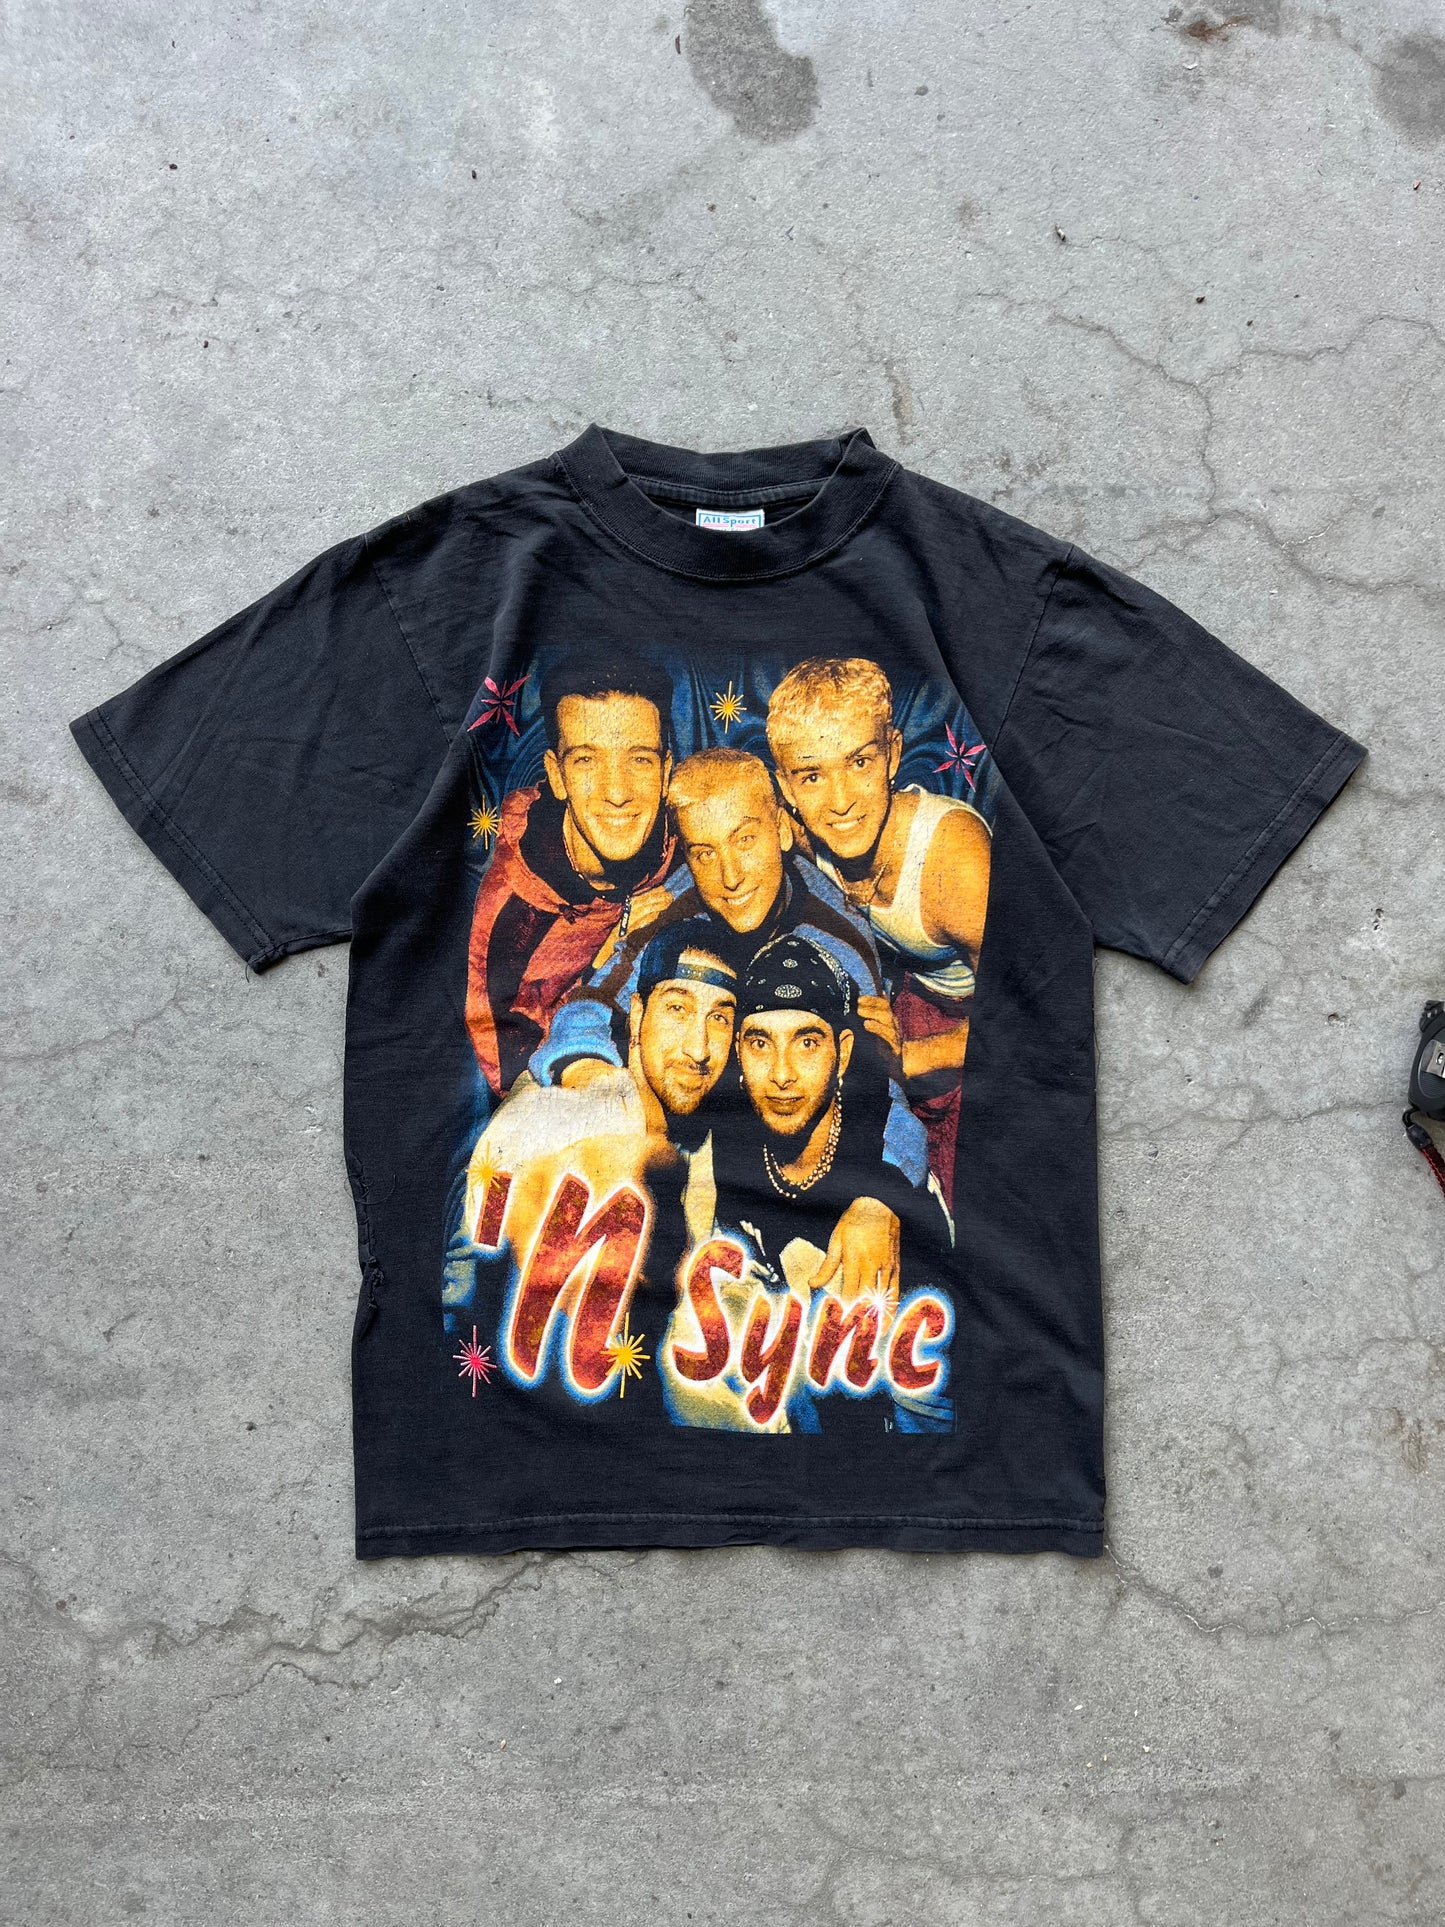 (S) 1998 N’SYNC Official Tour Tee